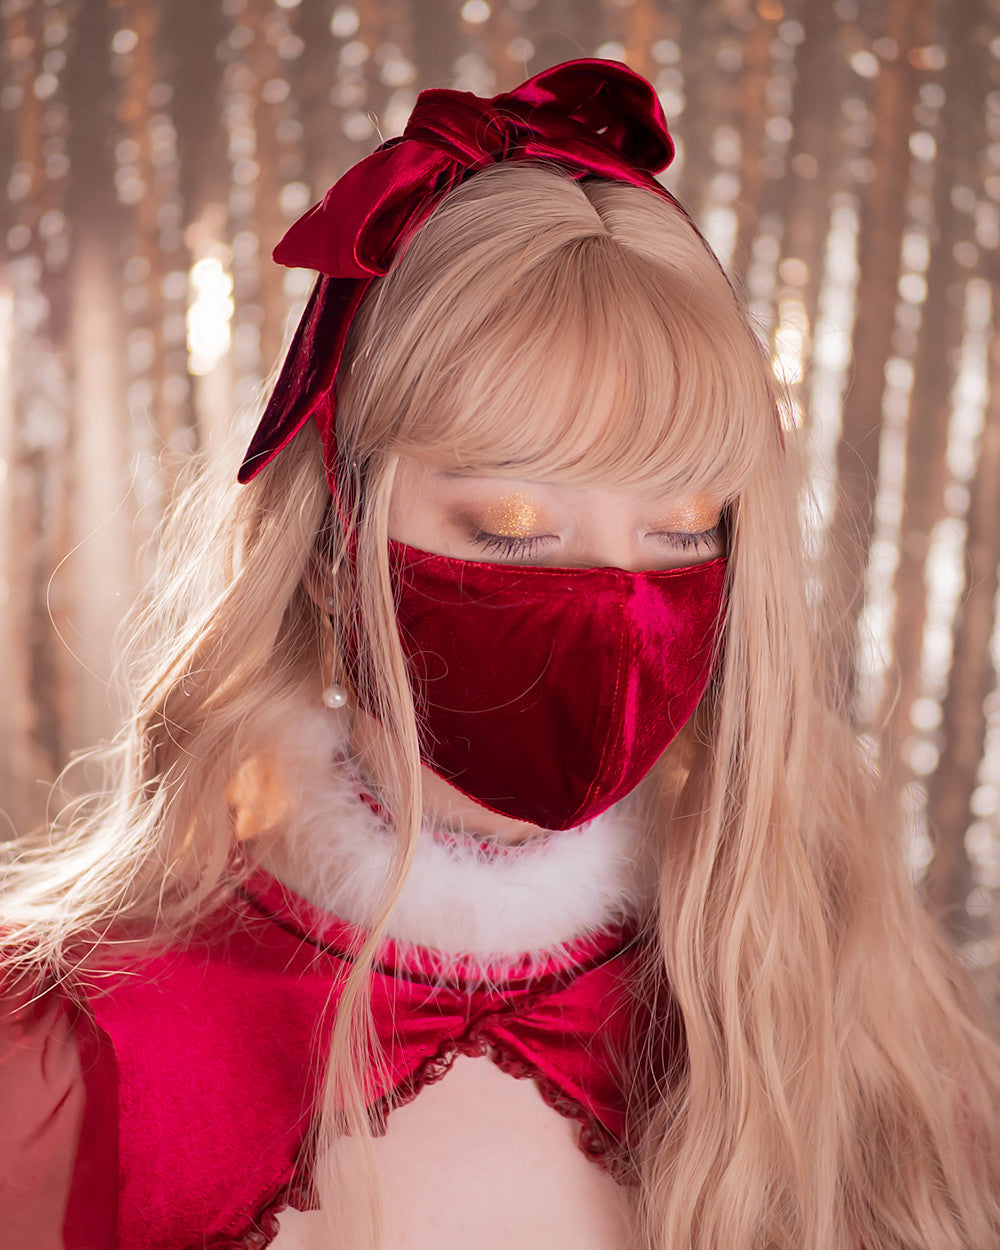 velvet-wine-face-mask-bow-1 MOEFLAVOR - Waifu Inspired Fashion and Lingerie Store